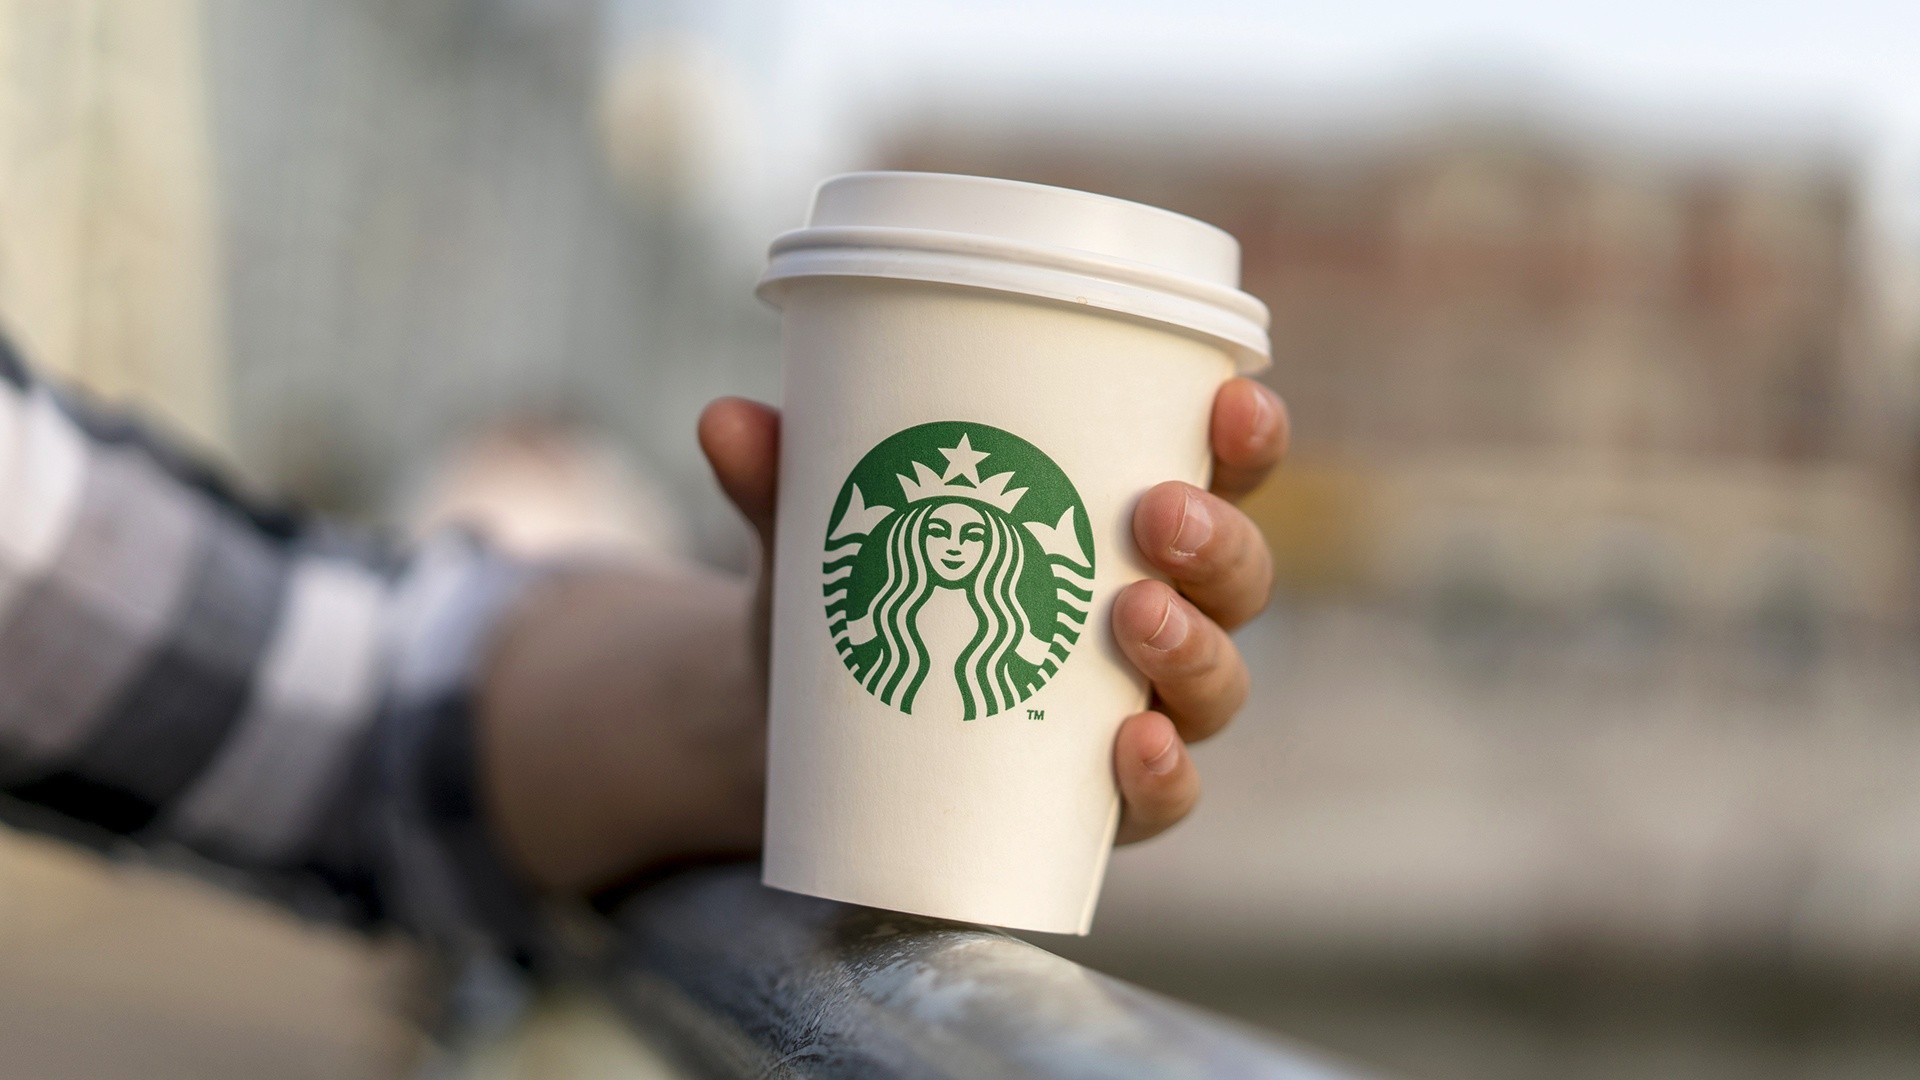 Starbucks releases designs for 25th anniversary holiday cups